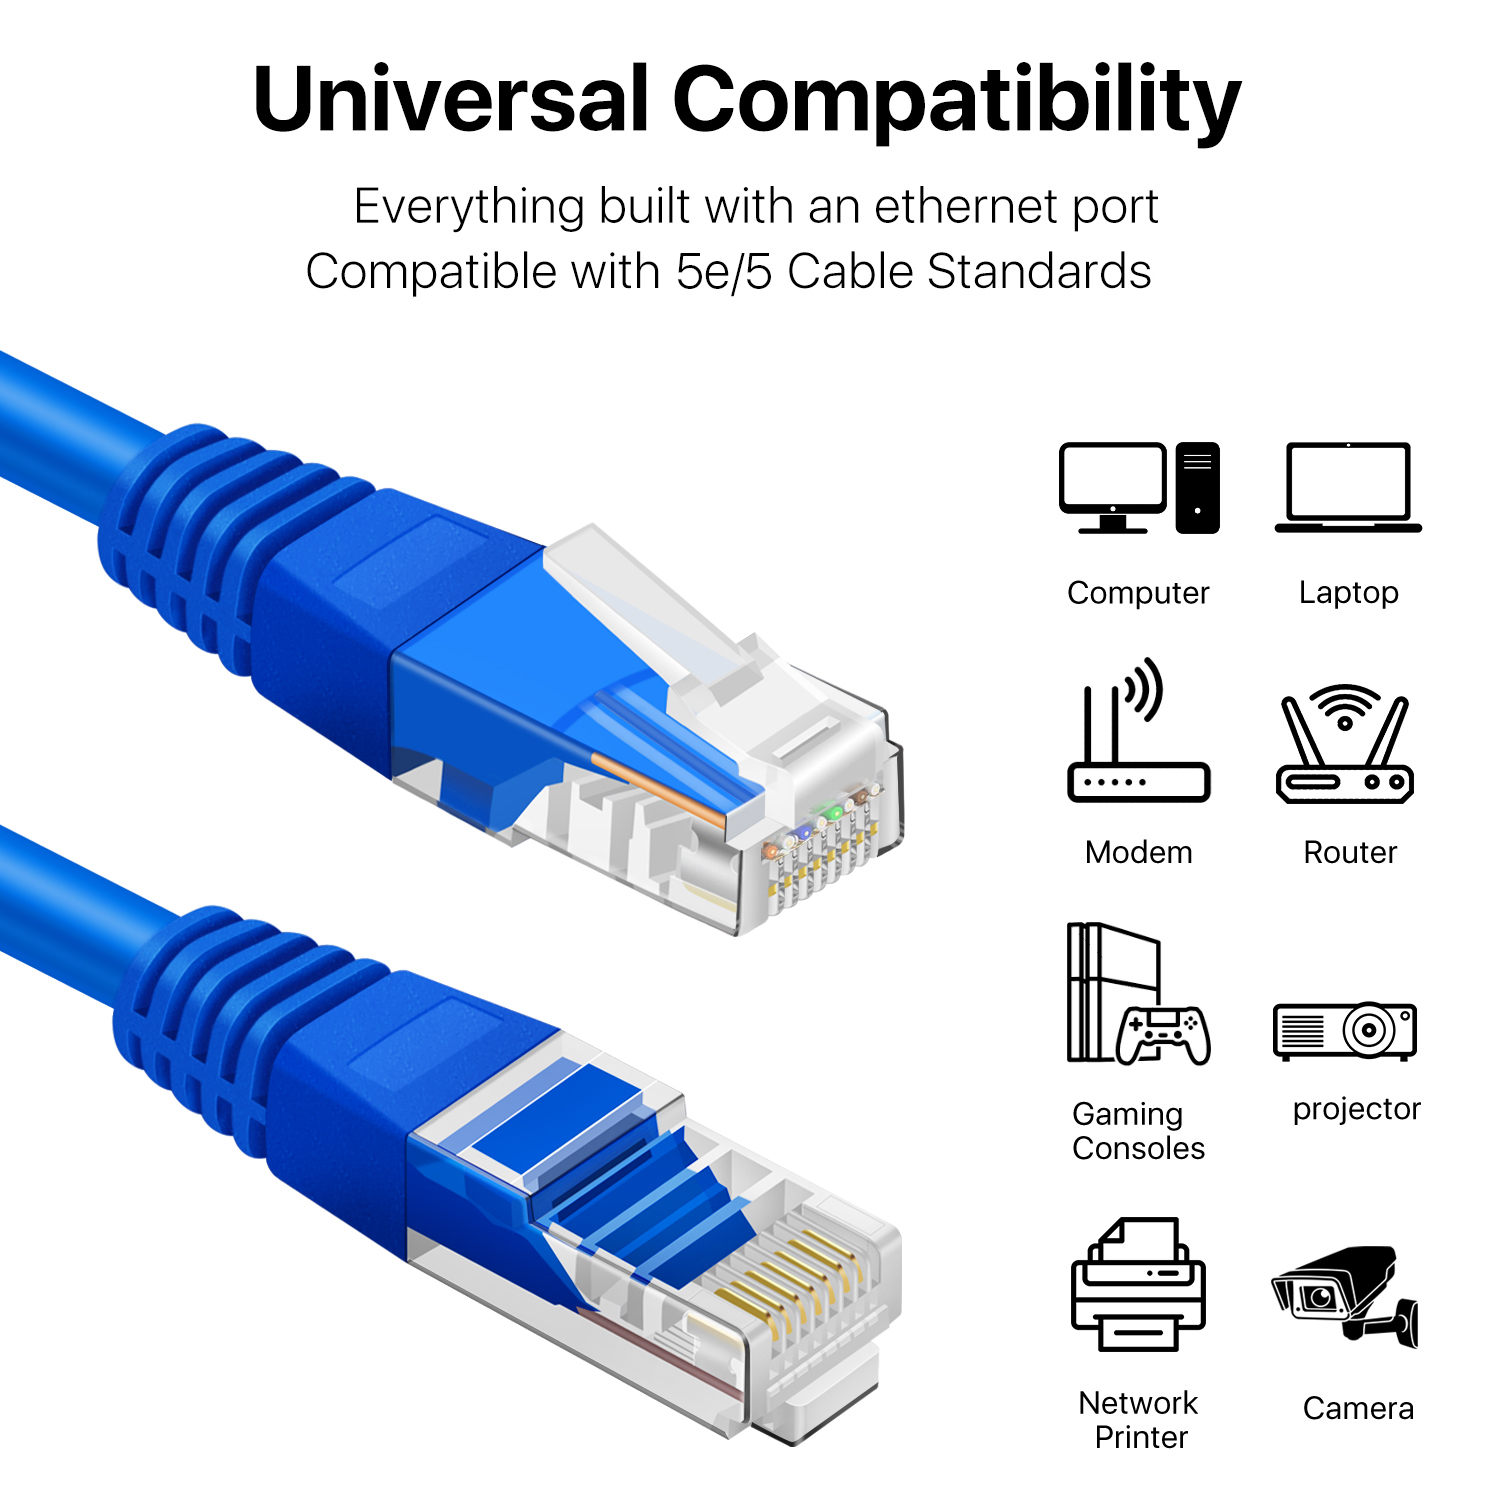 High Performance Ethernet cable CAT 5e Universal Compatibility - Cat5 8P8C modular RJ45 connectors Ethernet Patch Cable provides universal connectivity for LAN network cables components such as PCs, computer servers, printers, routers, switch boxes, network media players, NAS, VoIP phones, PoE devices, and more